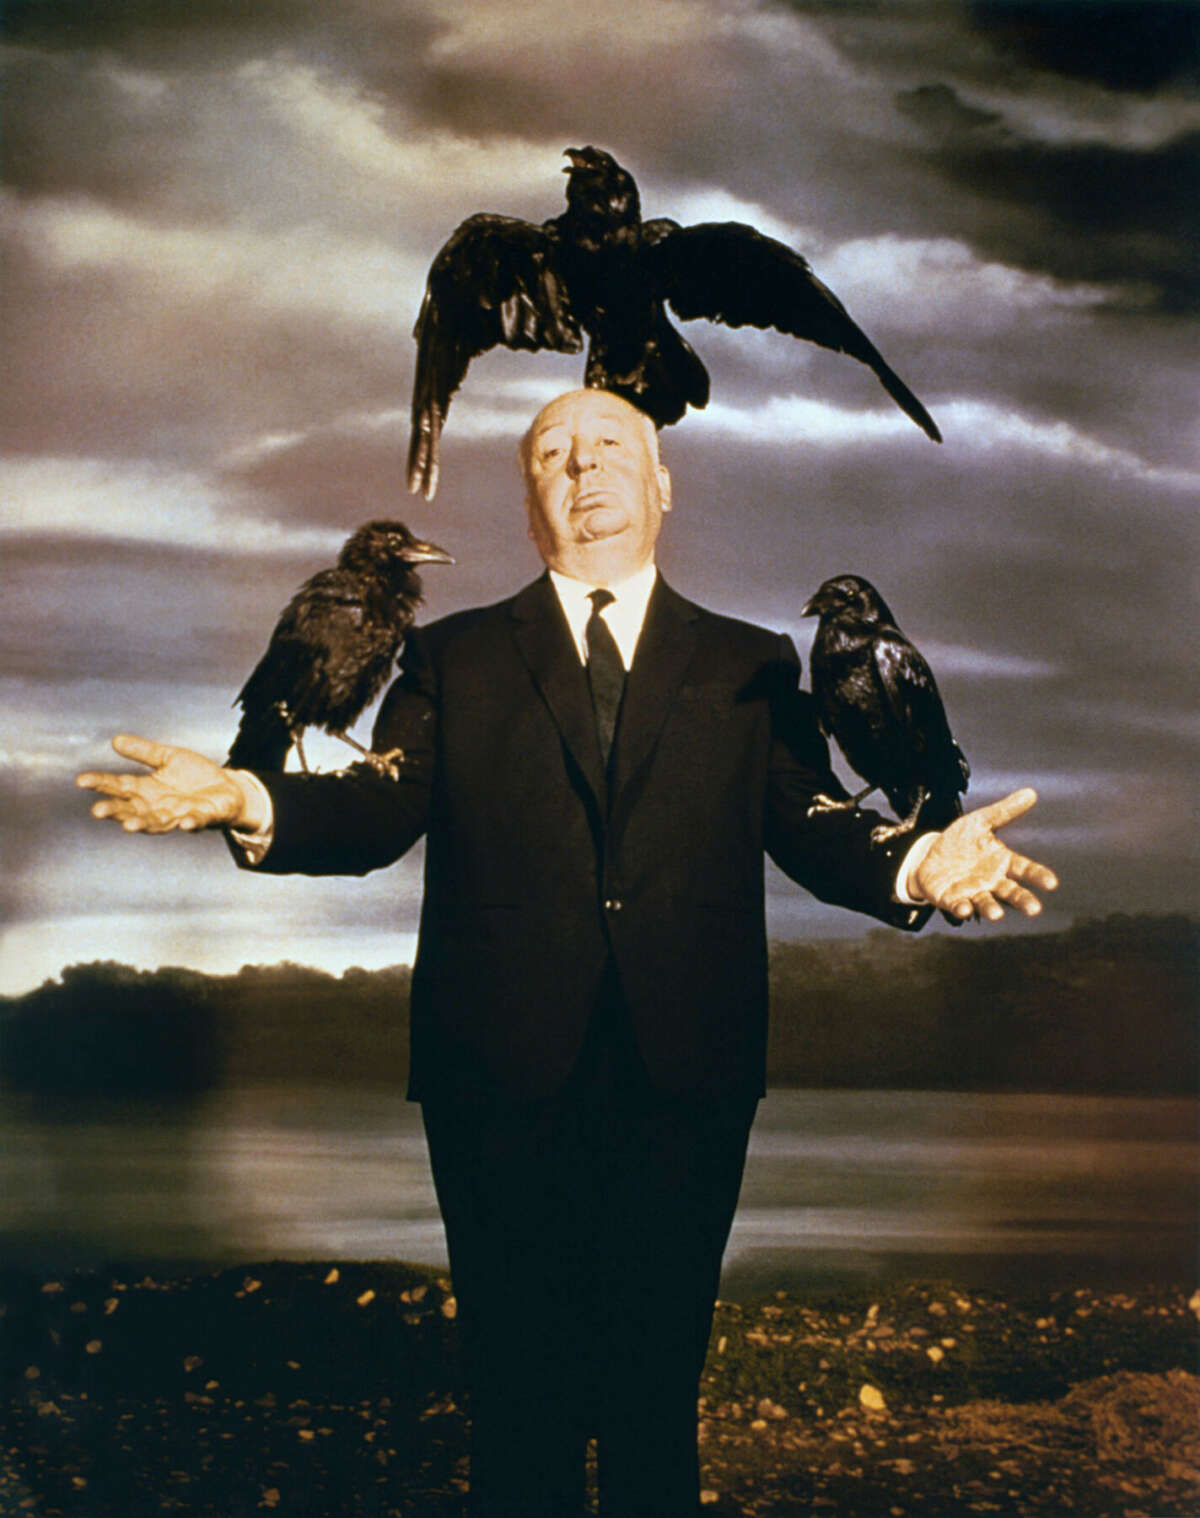 Man in suit with a bird on his head and two on his arms